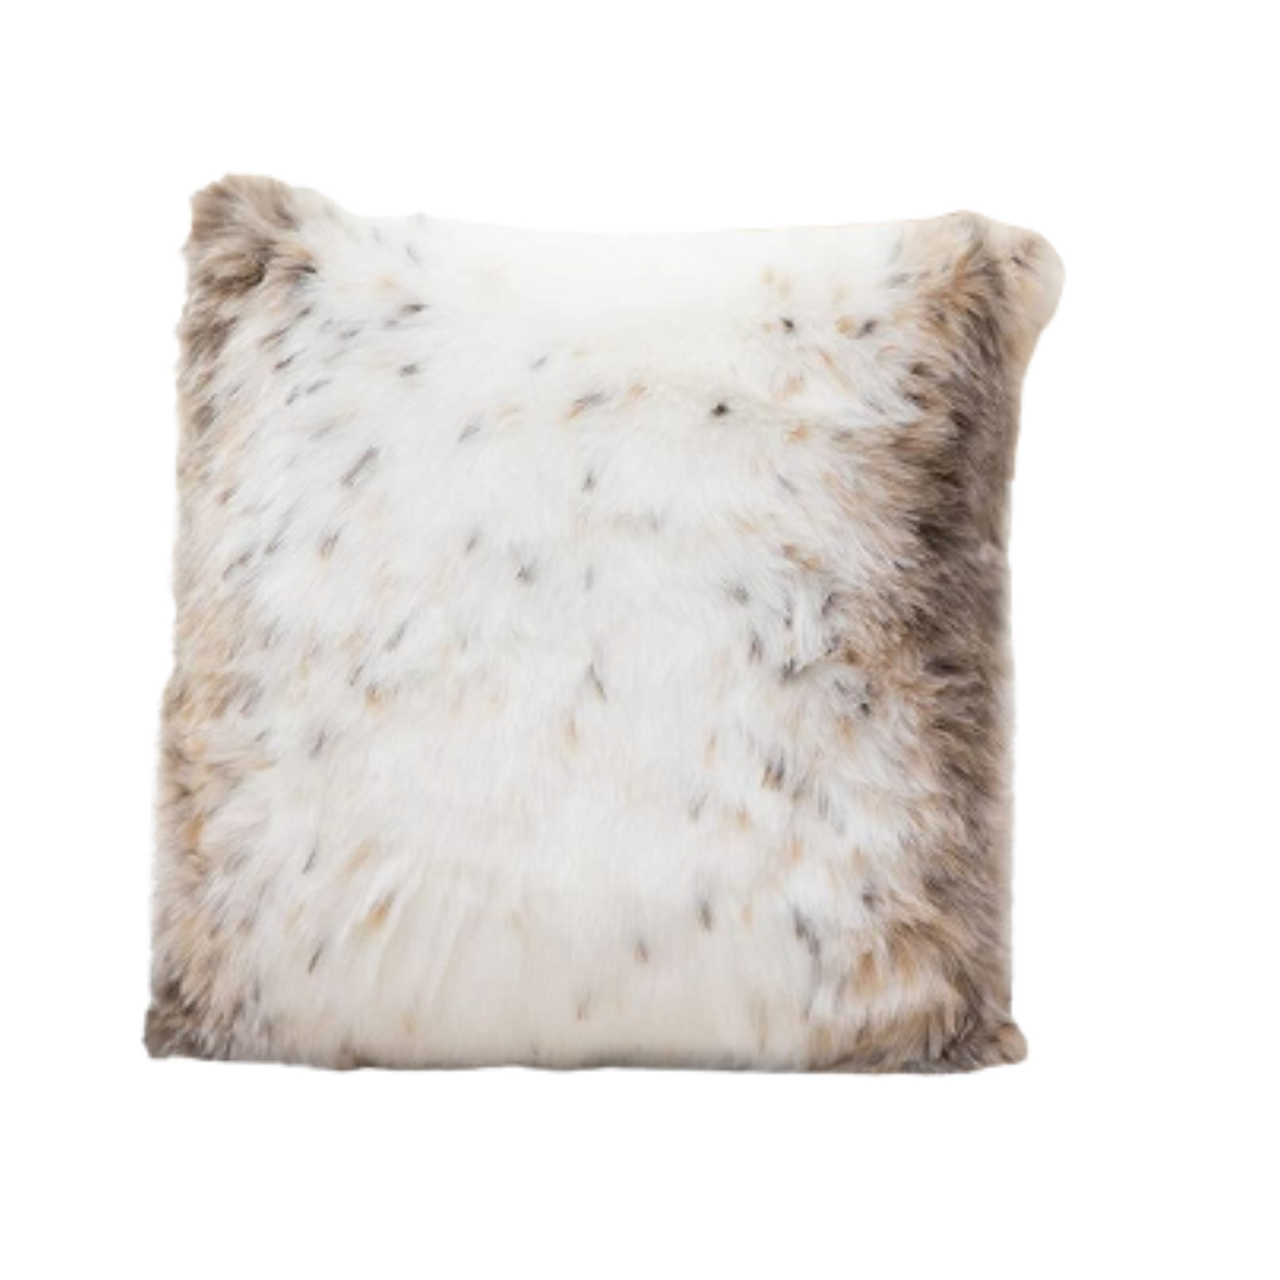 Cheer Collection™ Animal Print Fur Decorative Throw Pillow (2-Pack) product image